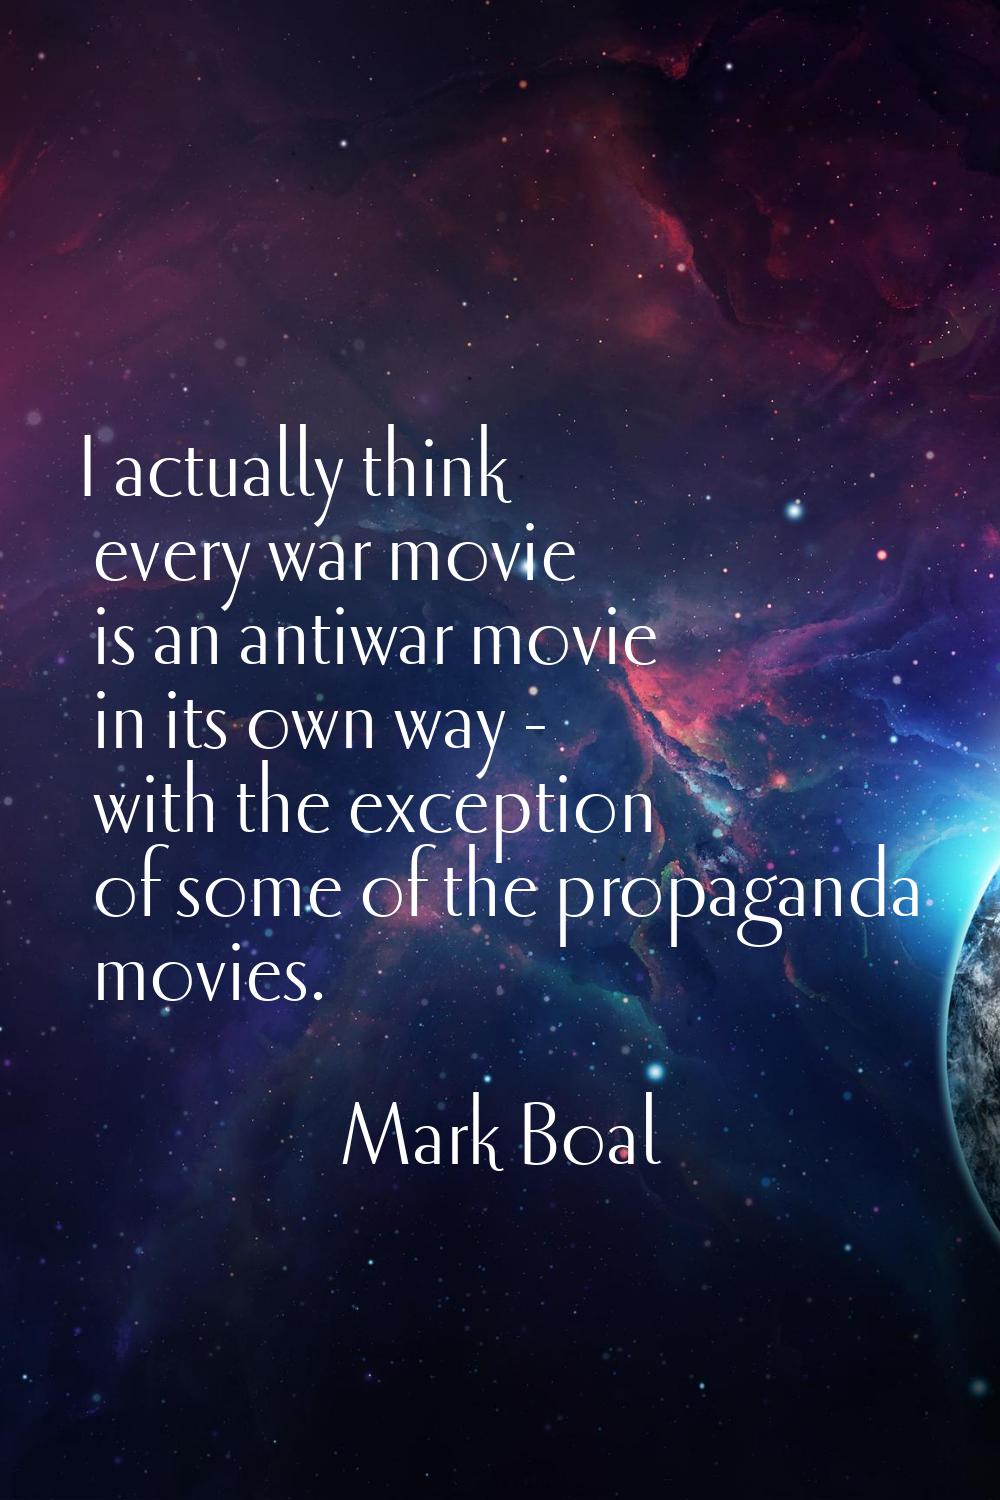 I actually think every war movie is an antiwar movie in its own way - with the exception of some of